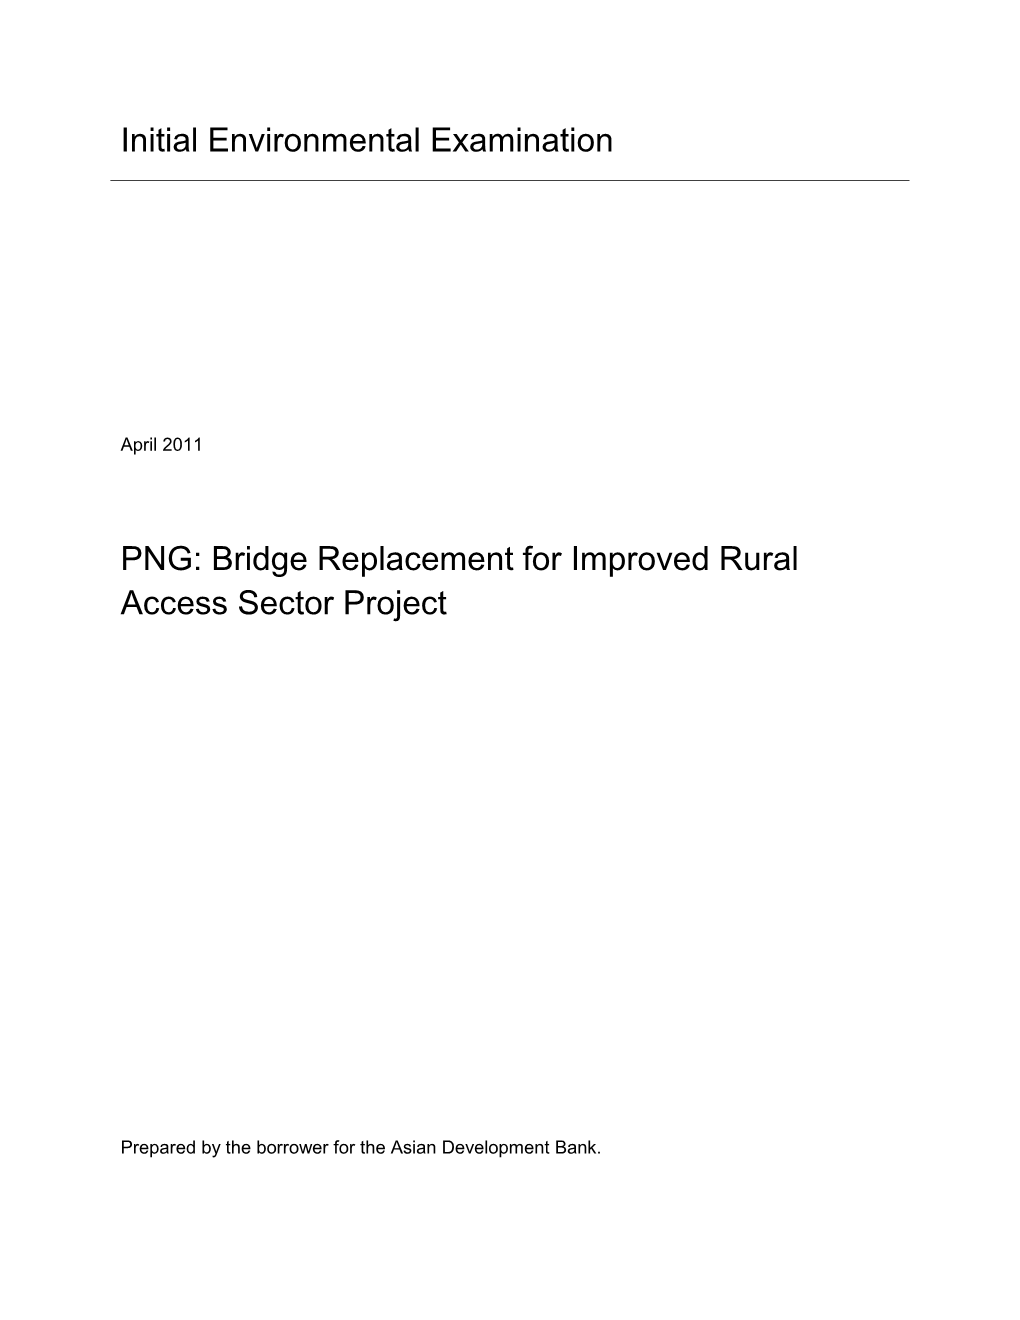 Ramu Highway, Bridge Replacement for Improved Rural Access Sector